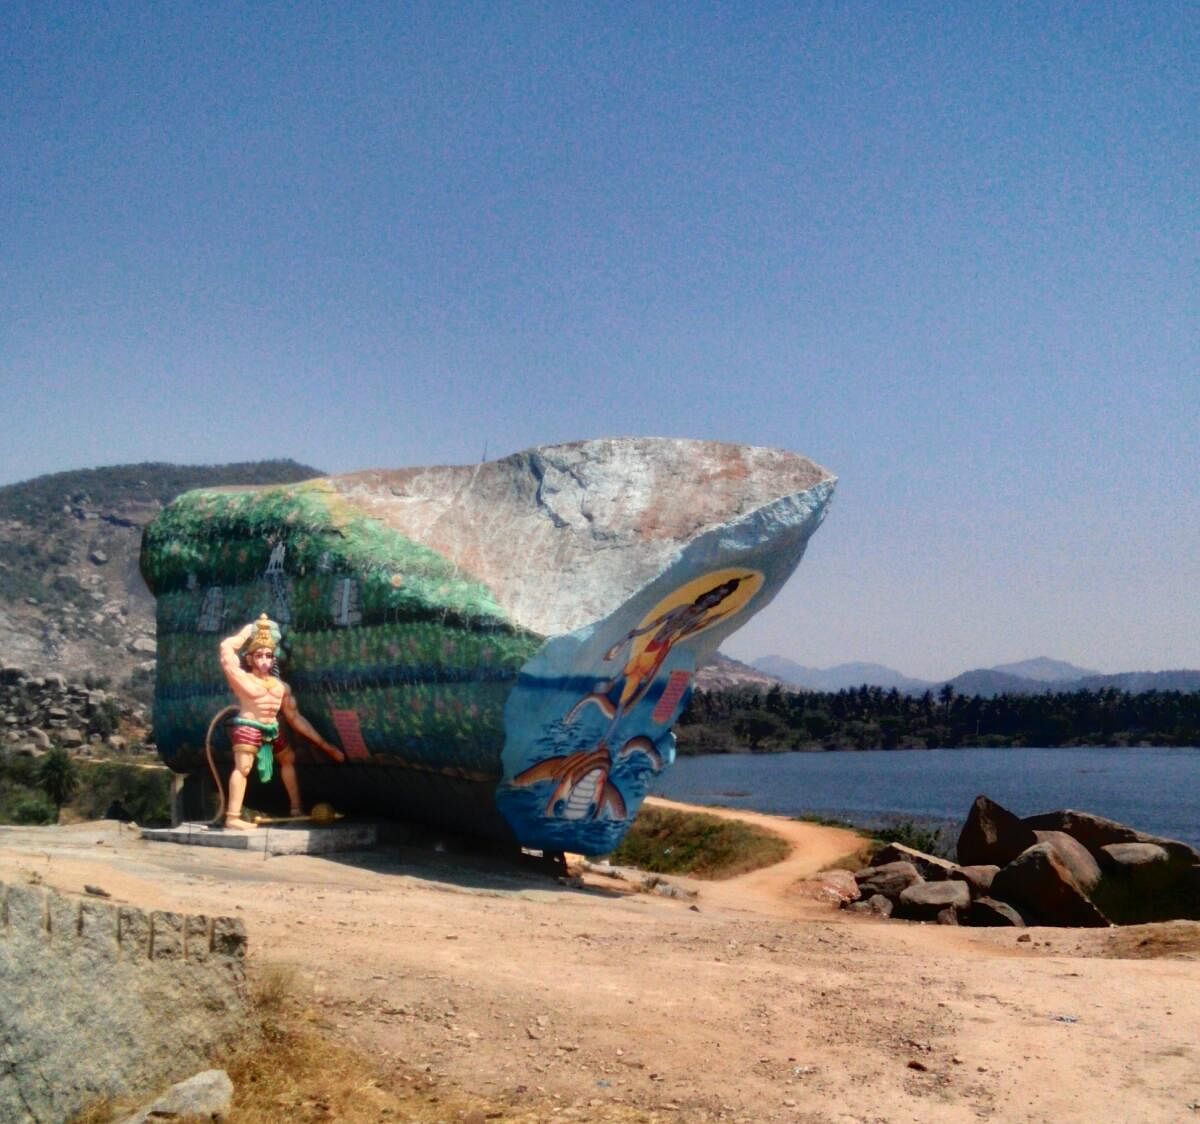 A view of the painted boulder next to the lake.